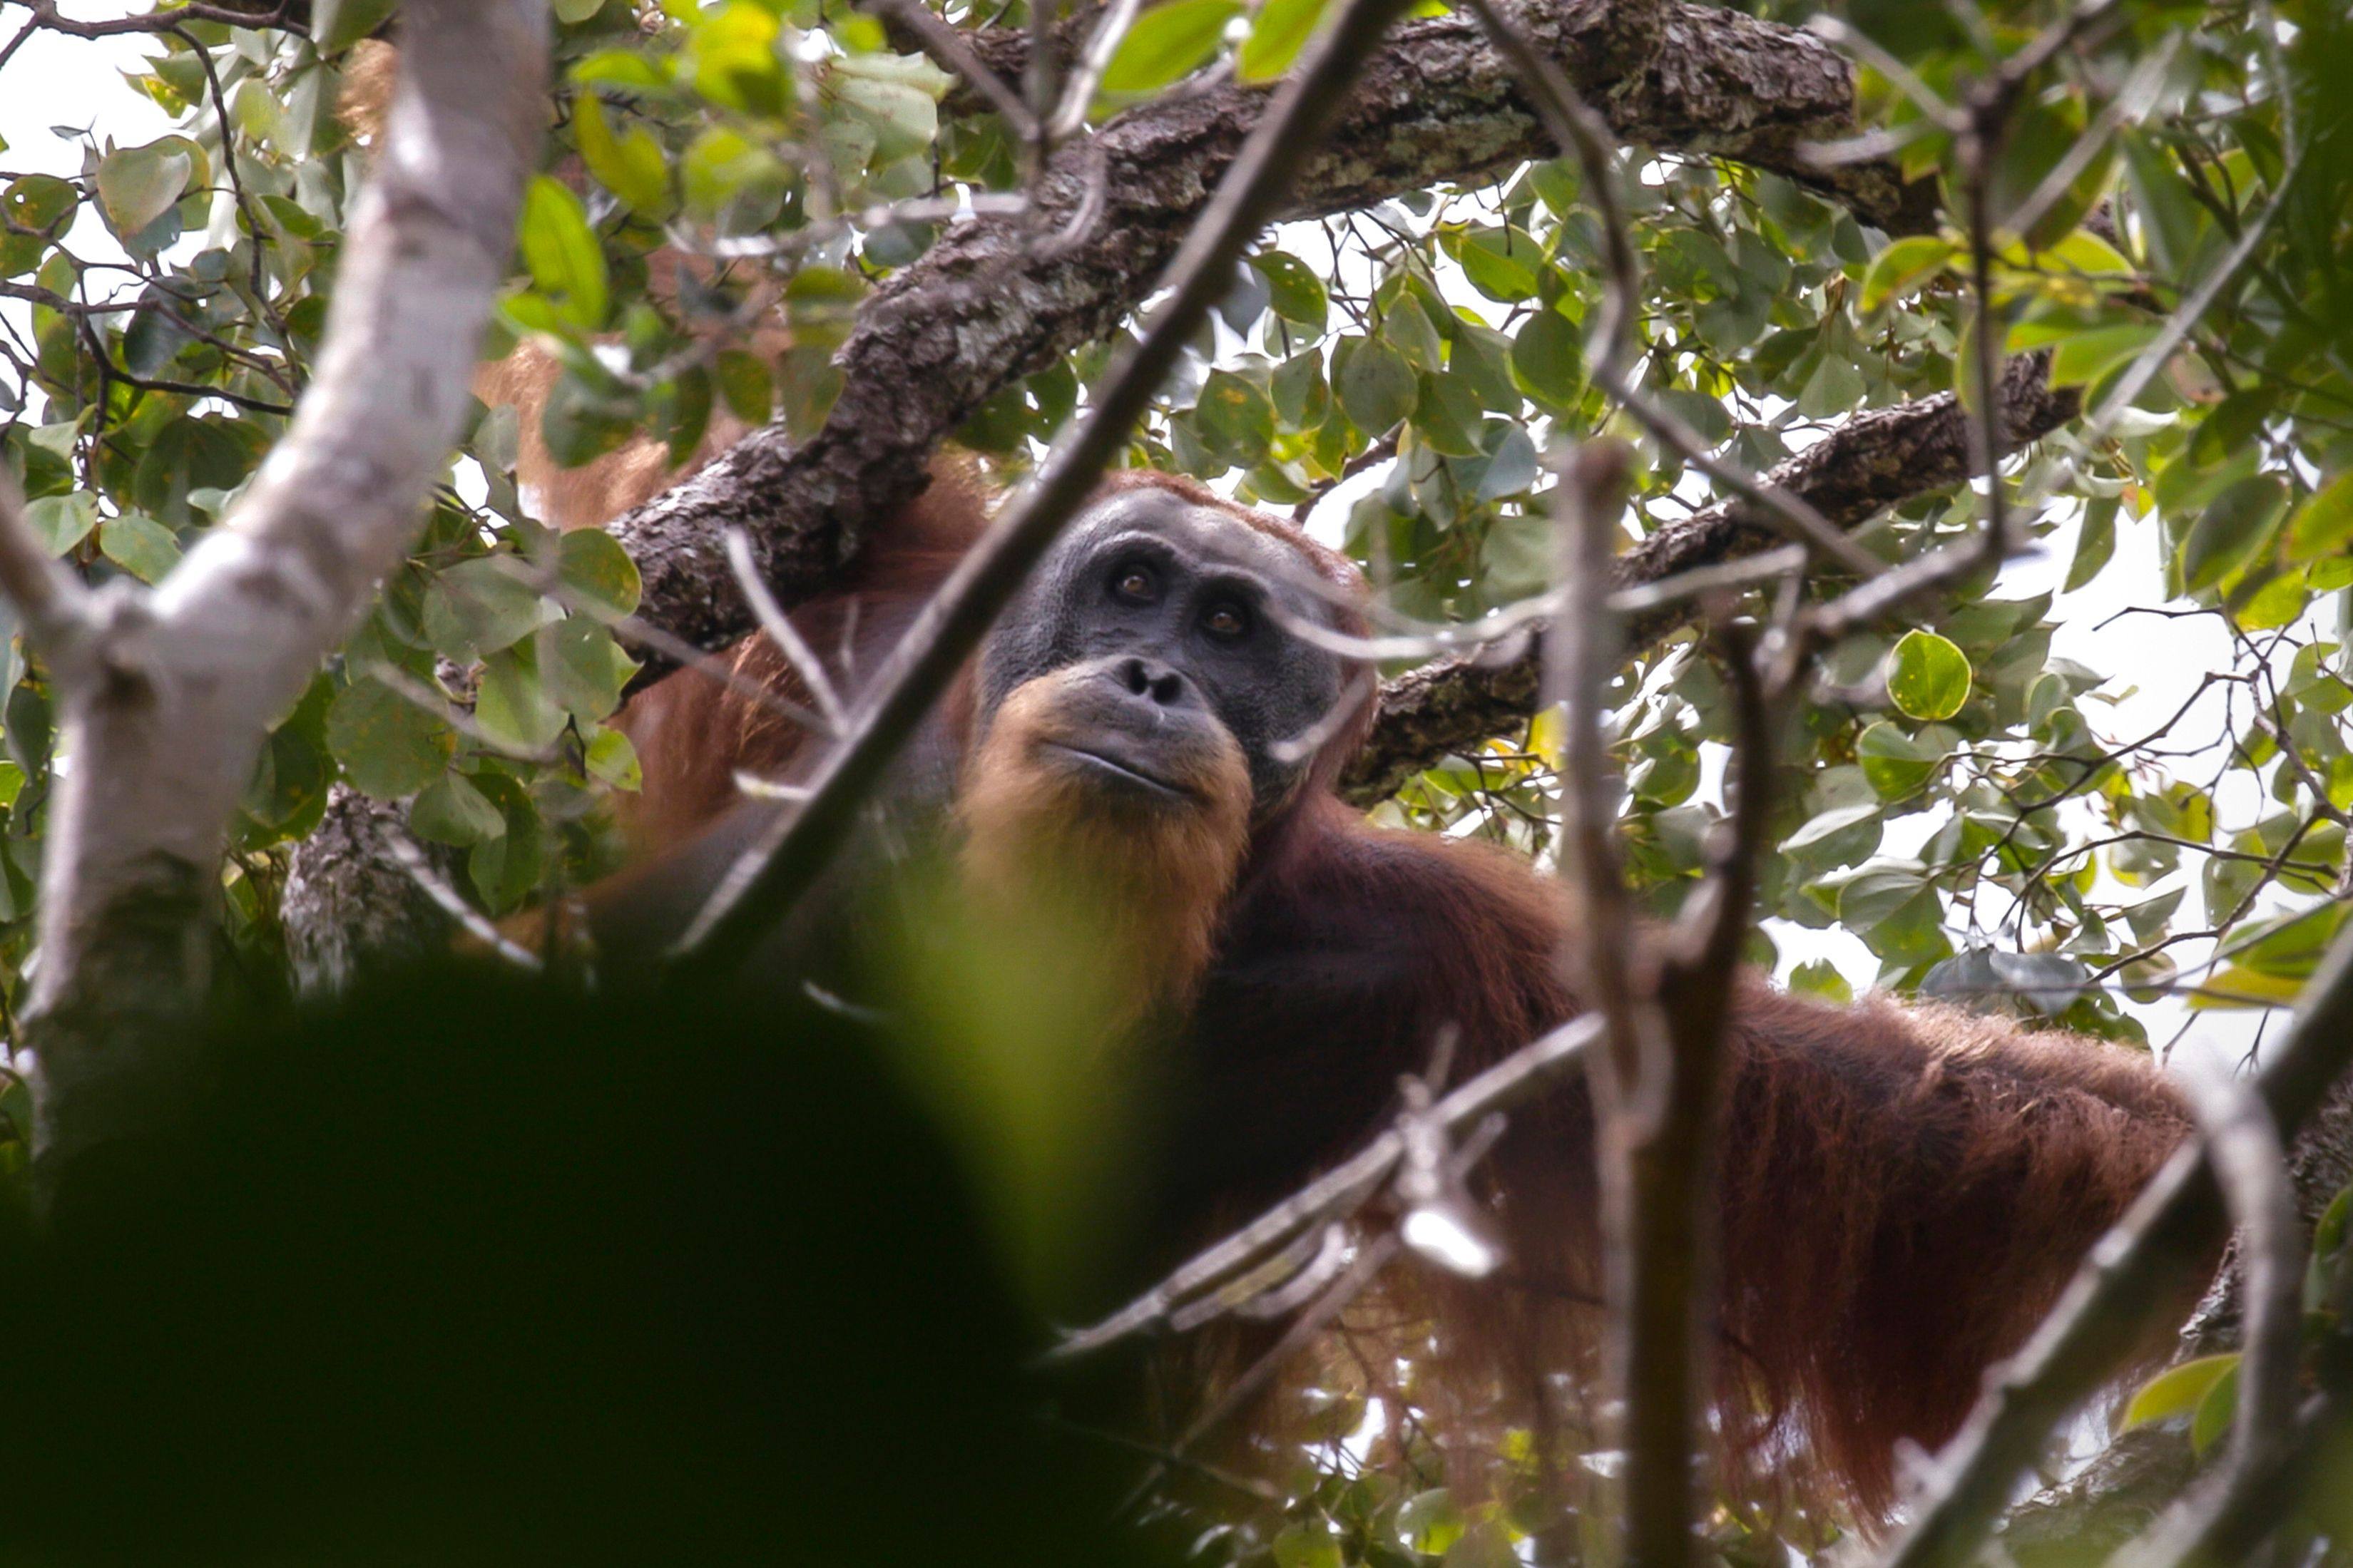 The population of Tapanuli orangutan has declined by 83 per cent over the past 75 years, largely due to hunting and habitat loss. Just 800 Tapanuli orangutans remain – and their last known habitat is threatened by a slew of infrastructure projects. Photo: AFP